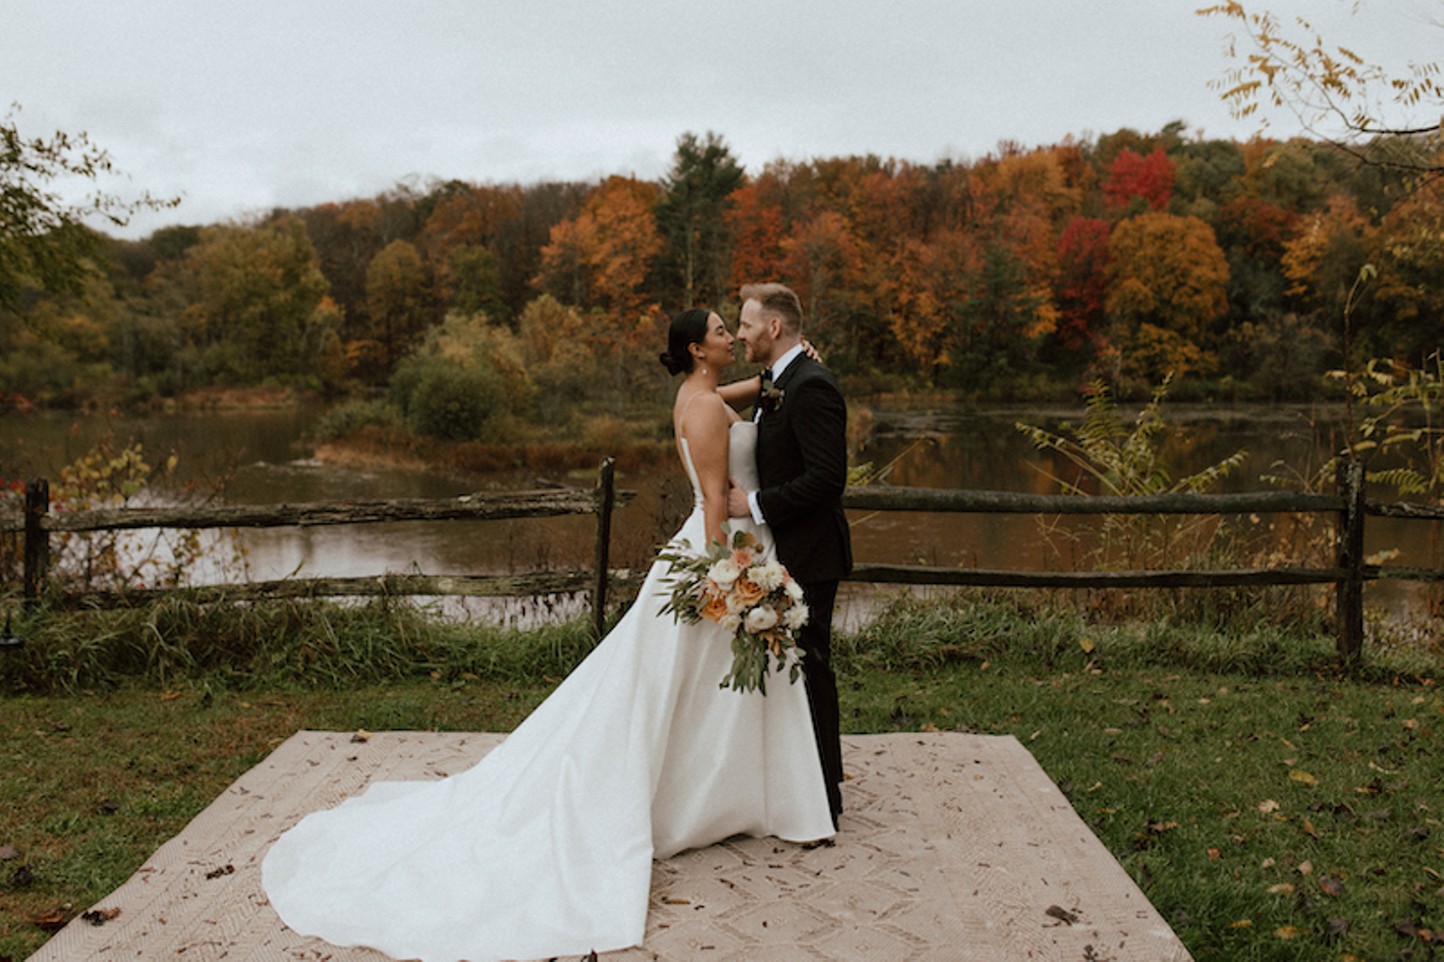 Vanderbilt Lakeside: A Columbia County Marriage ceremony Venue That Feels Worlds Away